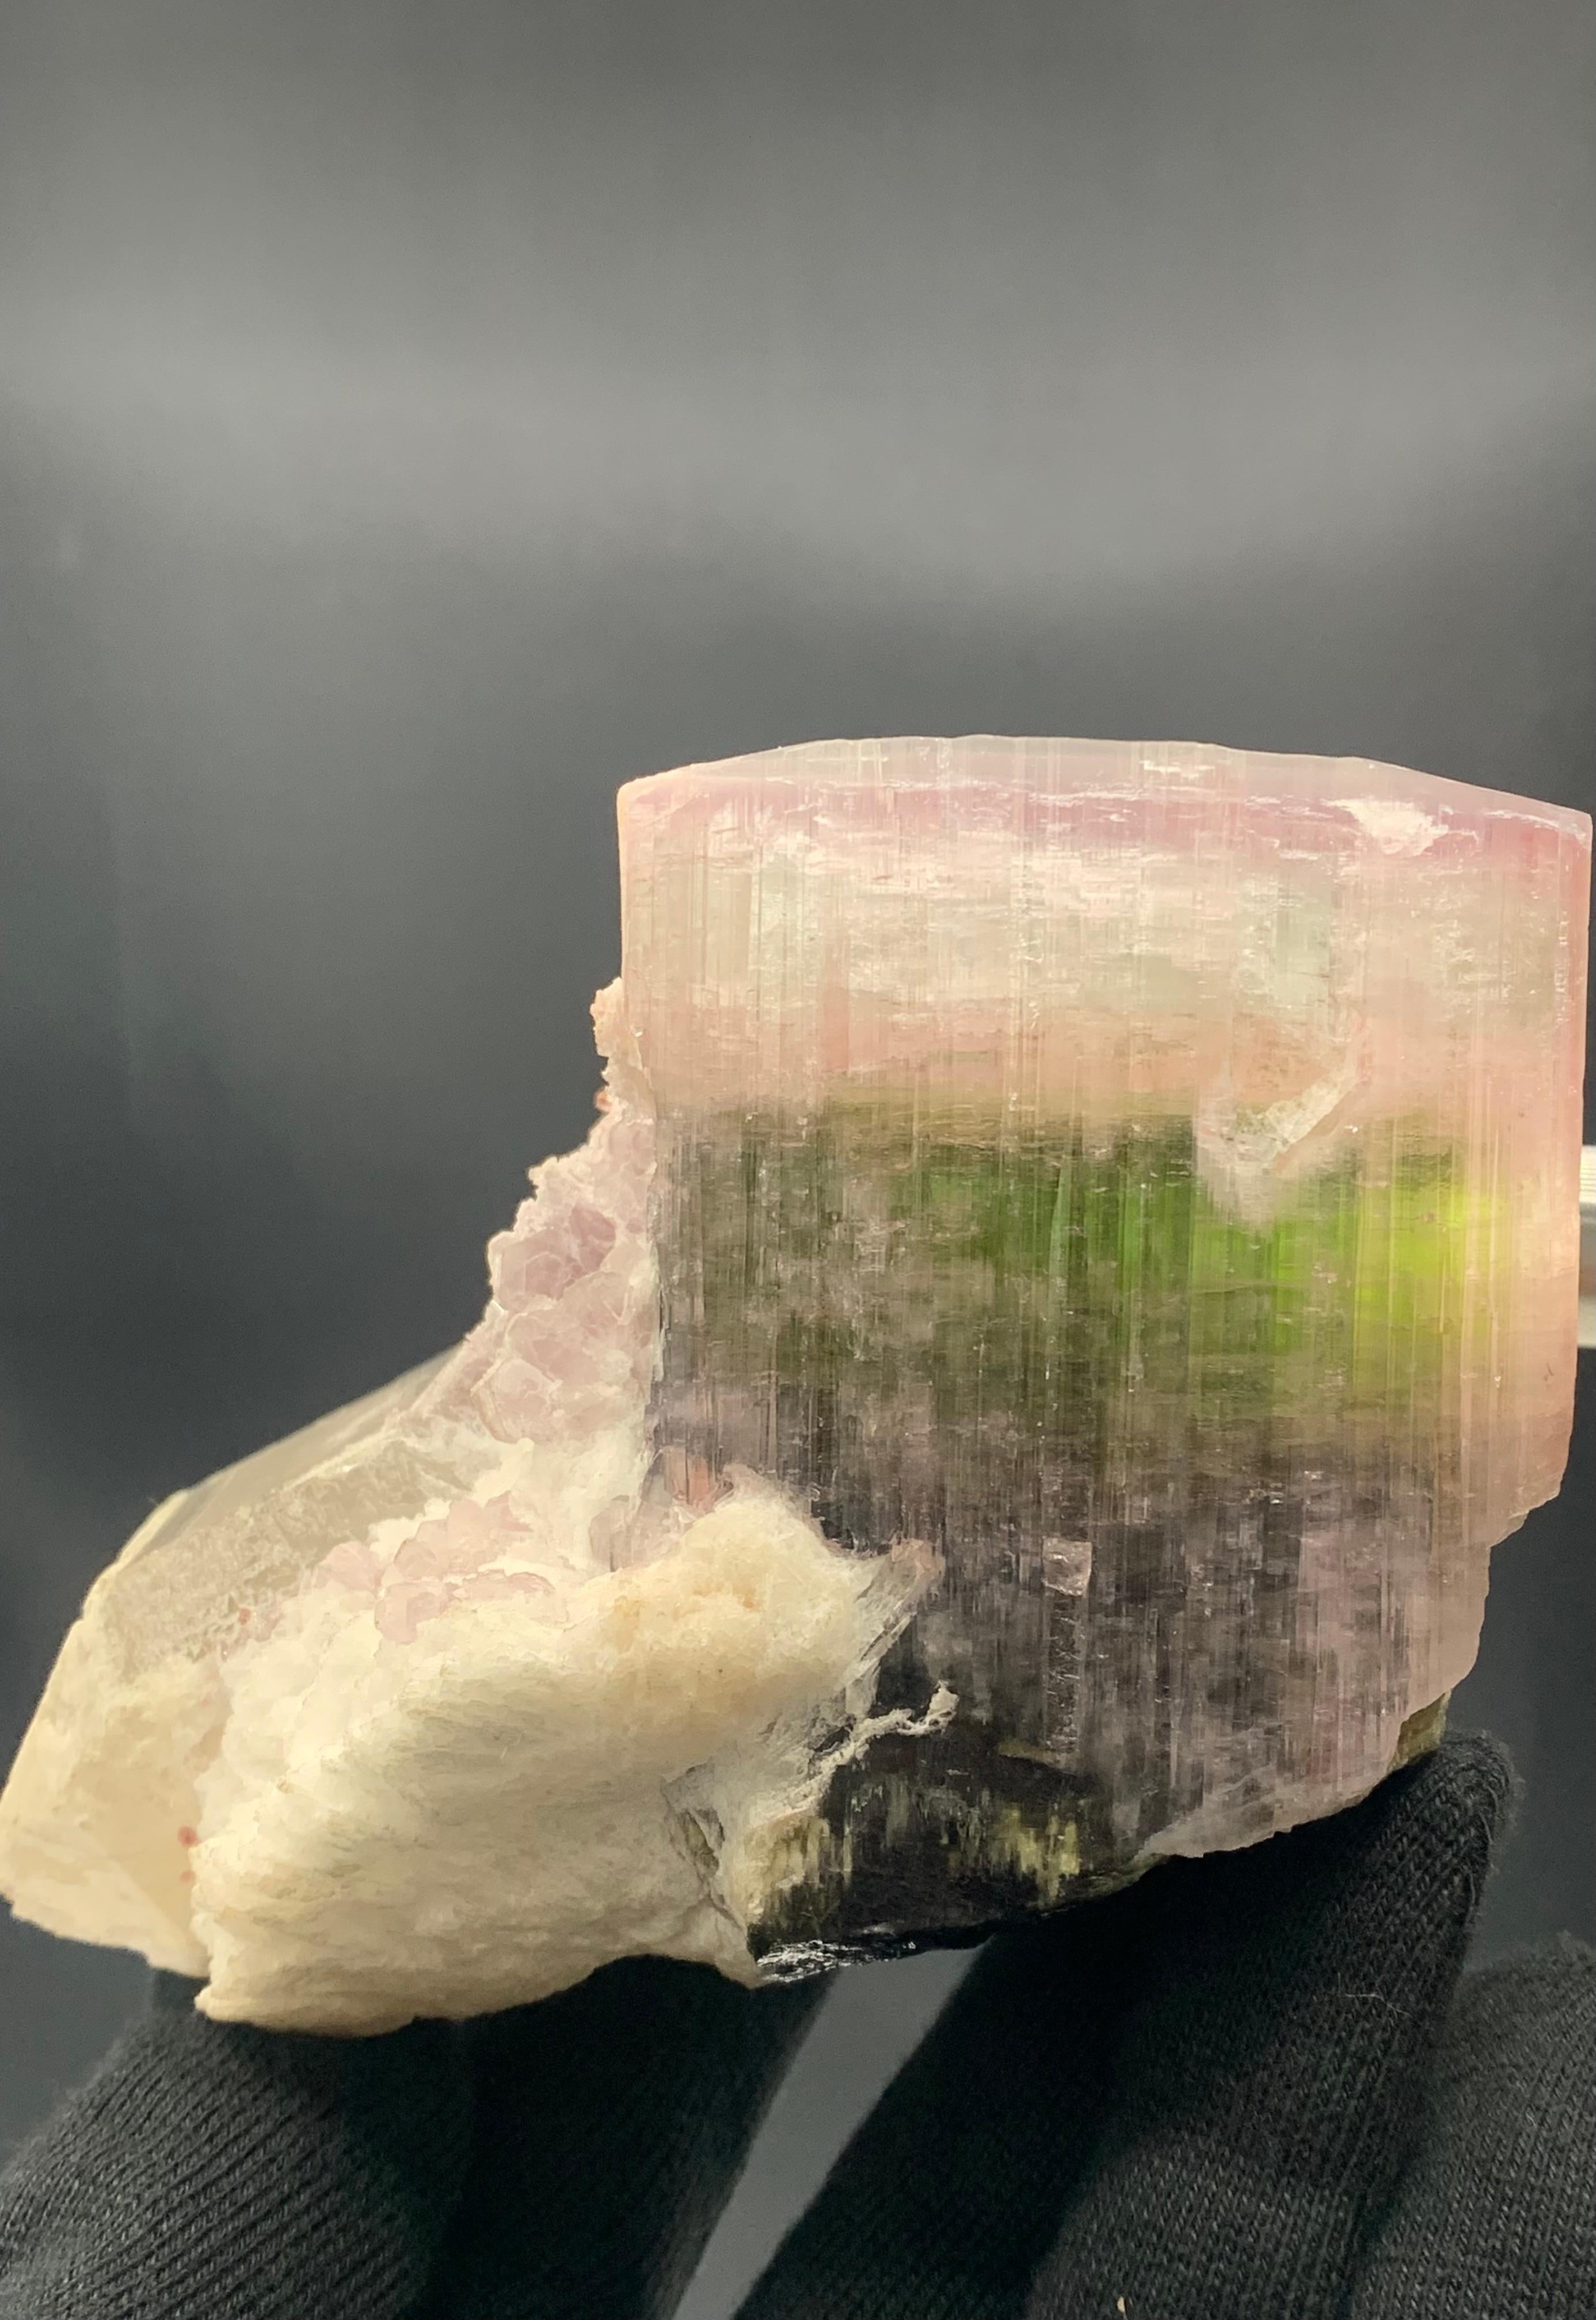 845 Gram Marvellous Tri Color Tourmaline Specimen With Big Quartz And Fluorite

Weight: 845 Gram 
Dimension: 8.5 x 12 x 8.4 Cm
Origin: Paprook Mine, Afghanistan 

Tourmaline is a crystalline silicate mineral group in which boron is compounded with